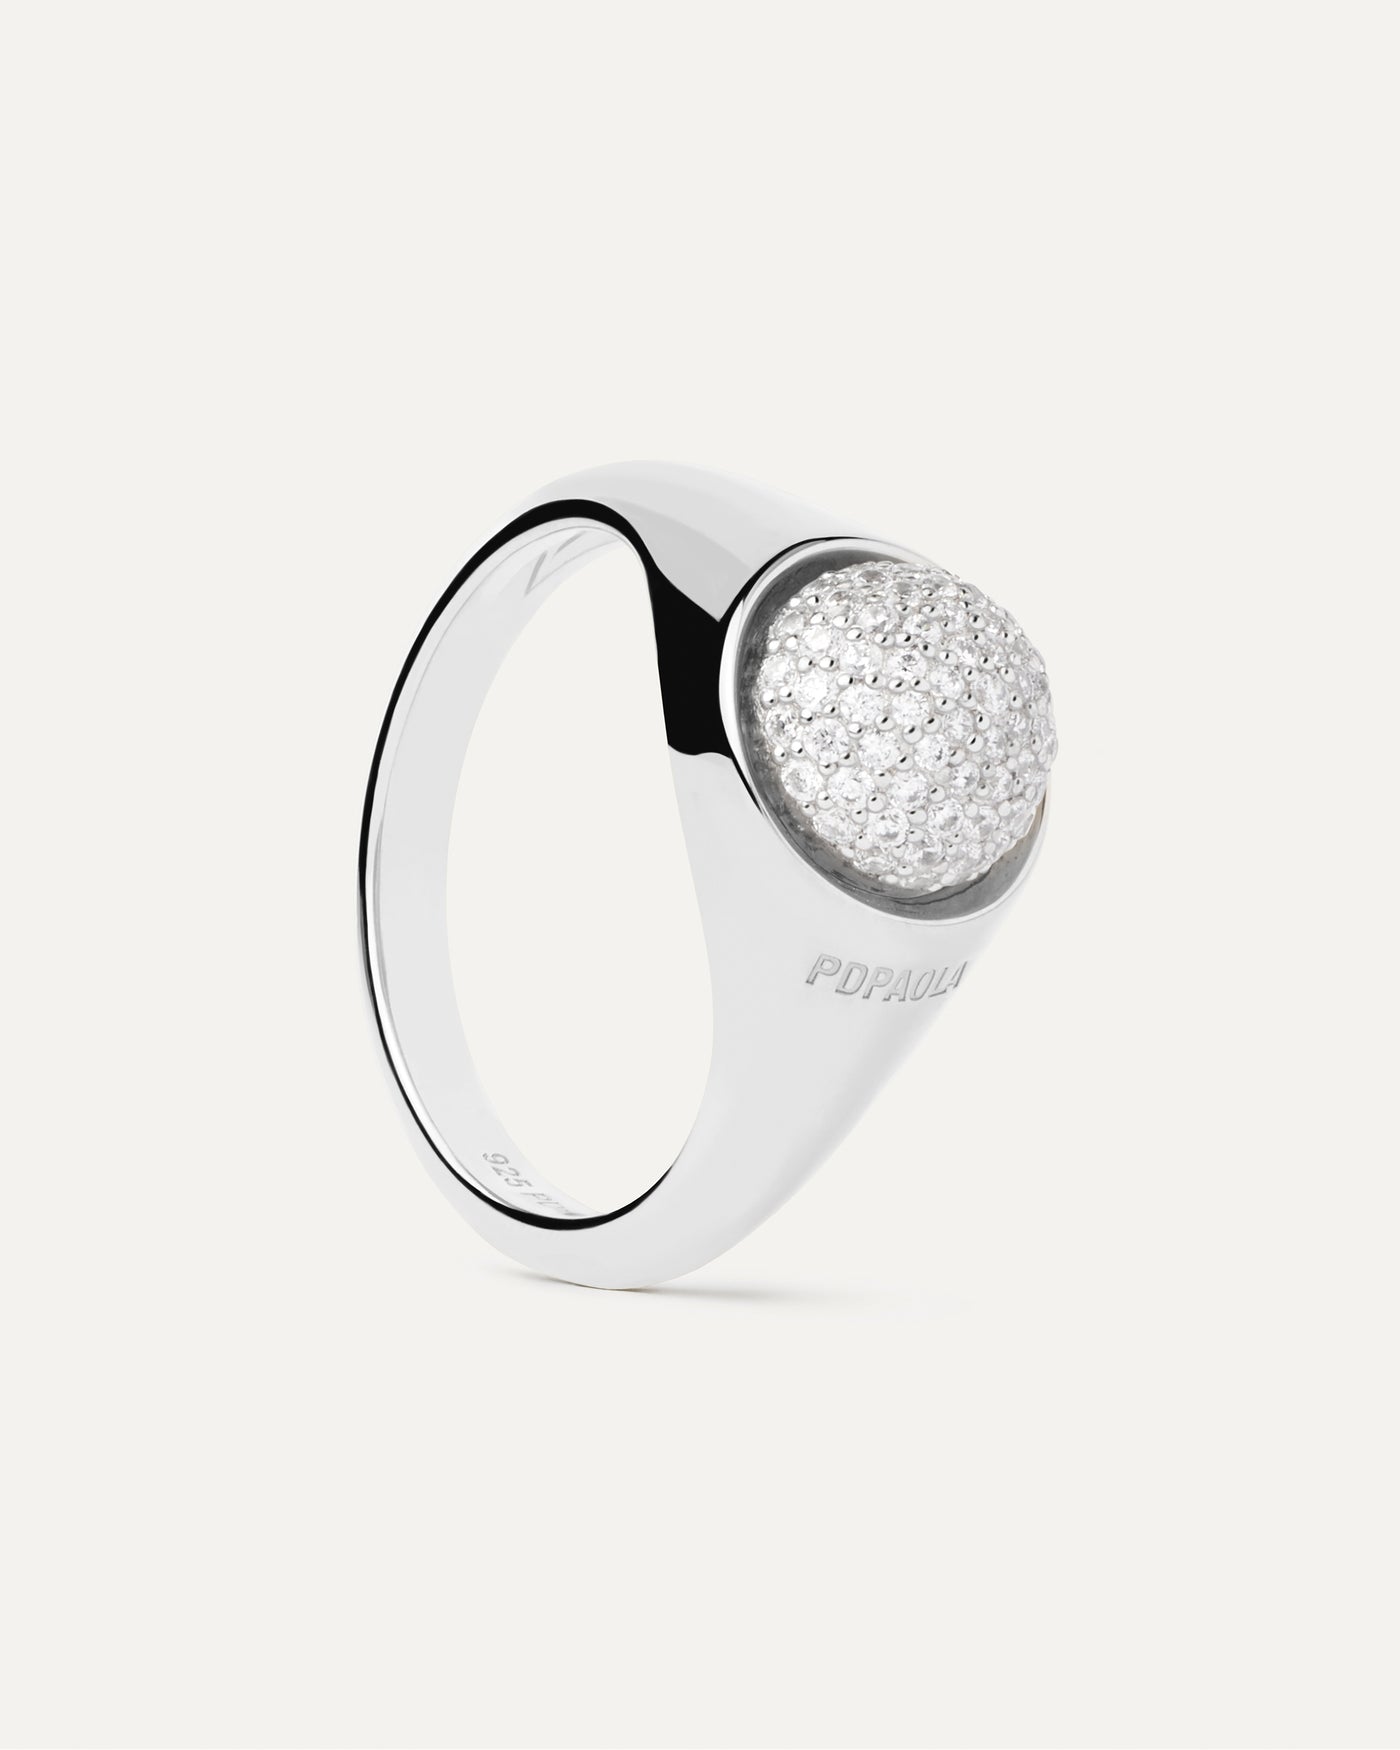 2023 Selection | Pavé Moon Silver Ring. Get the latest arrival from PDPAOLA. Place your order safely and get this Best Seller. Free Shipping.